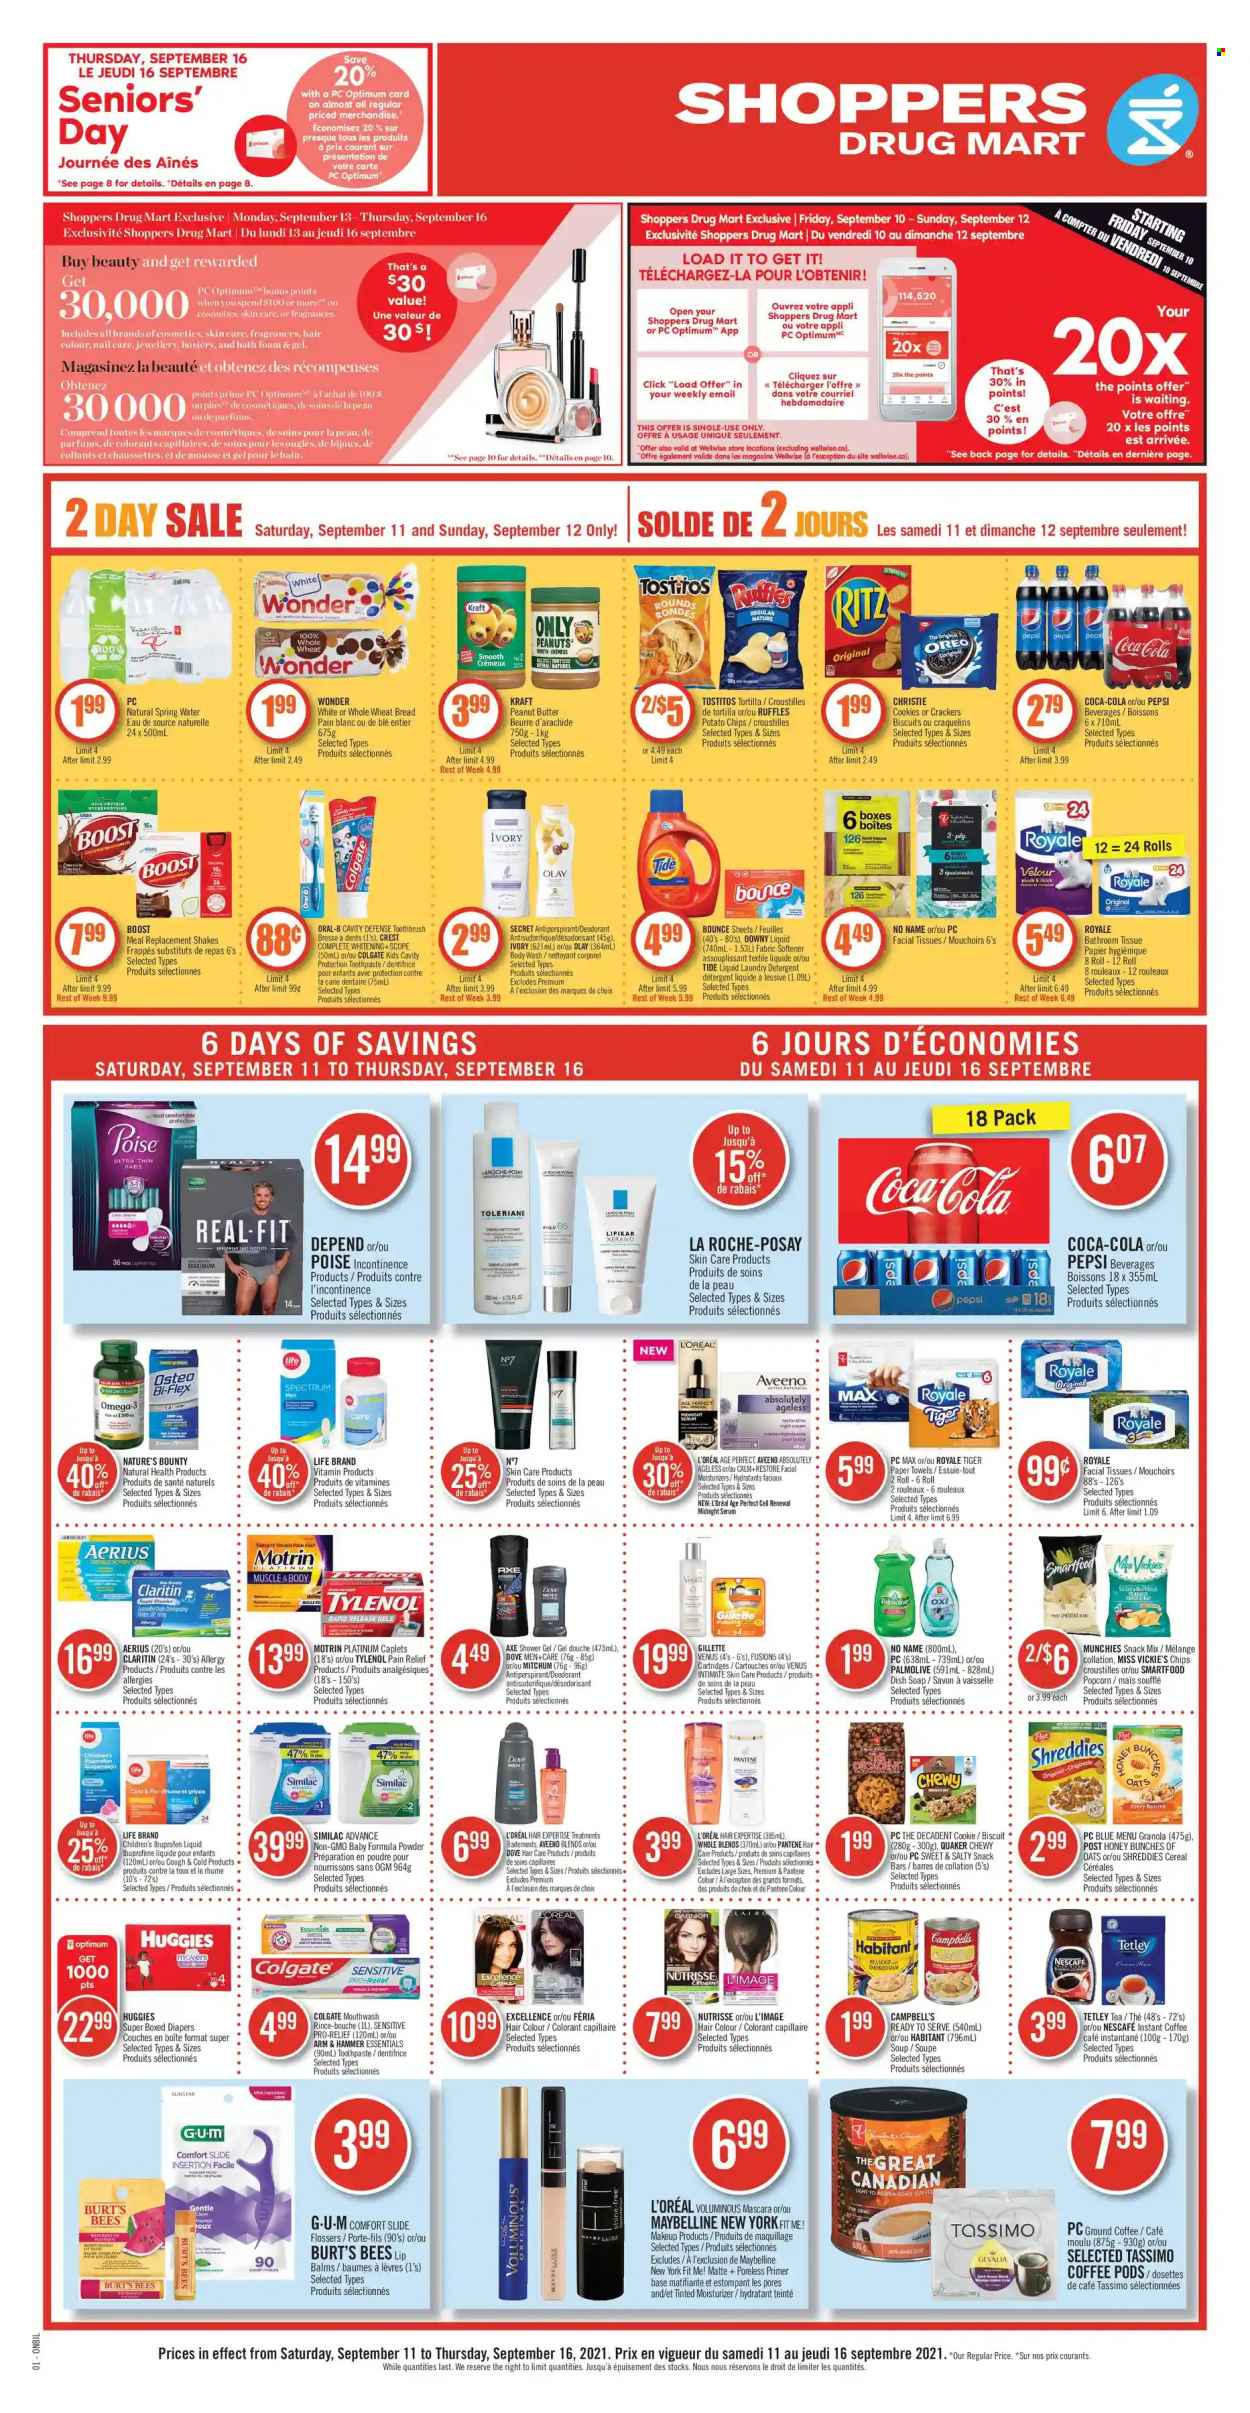 thumbnail - Shoppers Drug Mart Flyer - September 11, 2021 - September 16, 2021 - Sales products - cookies, snack, crackers, biscuit, snack bar, RITZ, tortillas, potato chips, Smartfood, popcorn, Ruffles, Tostitos, ARM & HAMMER, soup, cereals, Quaker, Campbell's, Kraft®, peanut butter, peanuts, Coca-Cola, Pepsi, spring water, Boost, tea, coffee pods, instant coffee, ground coffee, Gevalia, Similac, nappies, Aveeno, bath tissue, kitchen towels, paper towels, Tide, fabric softener, laundry detergent, Bounce, body wash, shower gel, bath foam, Palmolive, soap, toothbrush, toothpaste, mouthwash, Crest, facial tissues, L’Oréal, La Roche-Posay, moisturizer, serum, night cream, Olay, hair color, anti-perspirant, Venus, makeup, hosiery, pain relief, Nature's Bounty, Tylenol, Ibuprofen, Omega-3, Spectrum, Motrin, Oreo, detergent, Dove, Colgate, Gillette, granola, mascara, Maybelline, Huggies, Pantene, Oral-B, chips, Nescafé, deodorant. Page 1.